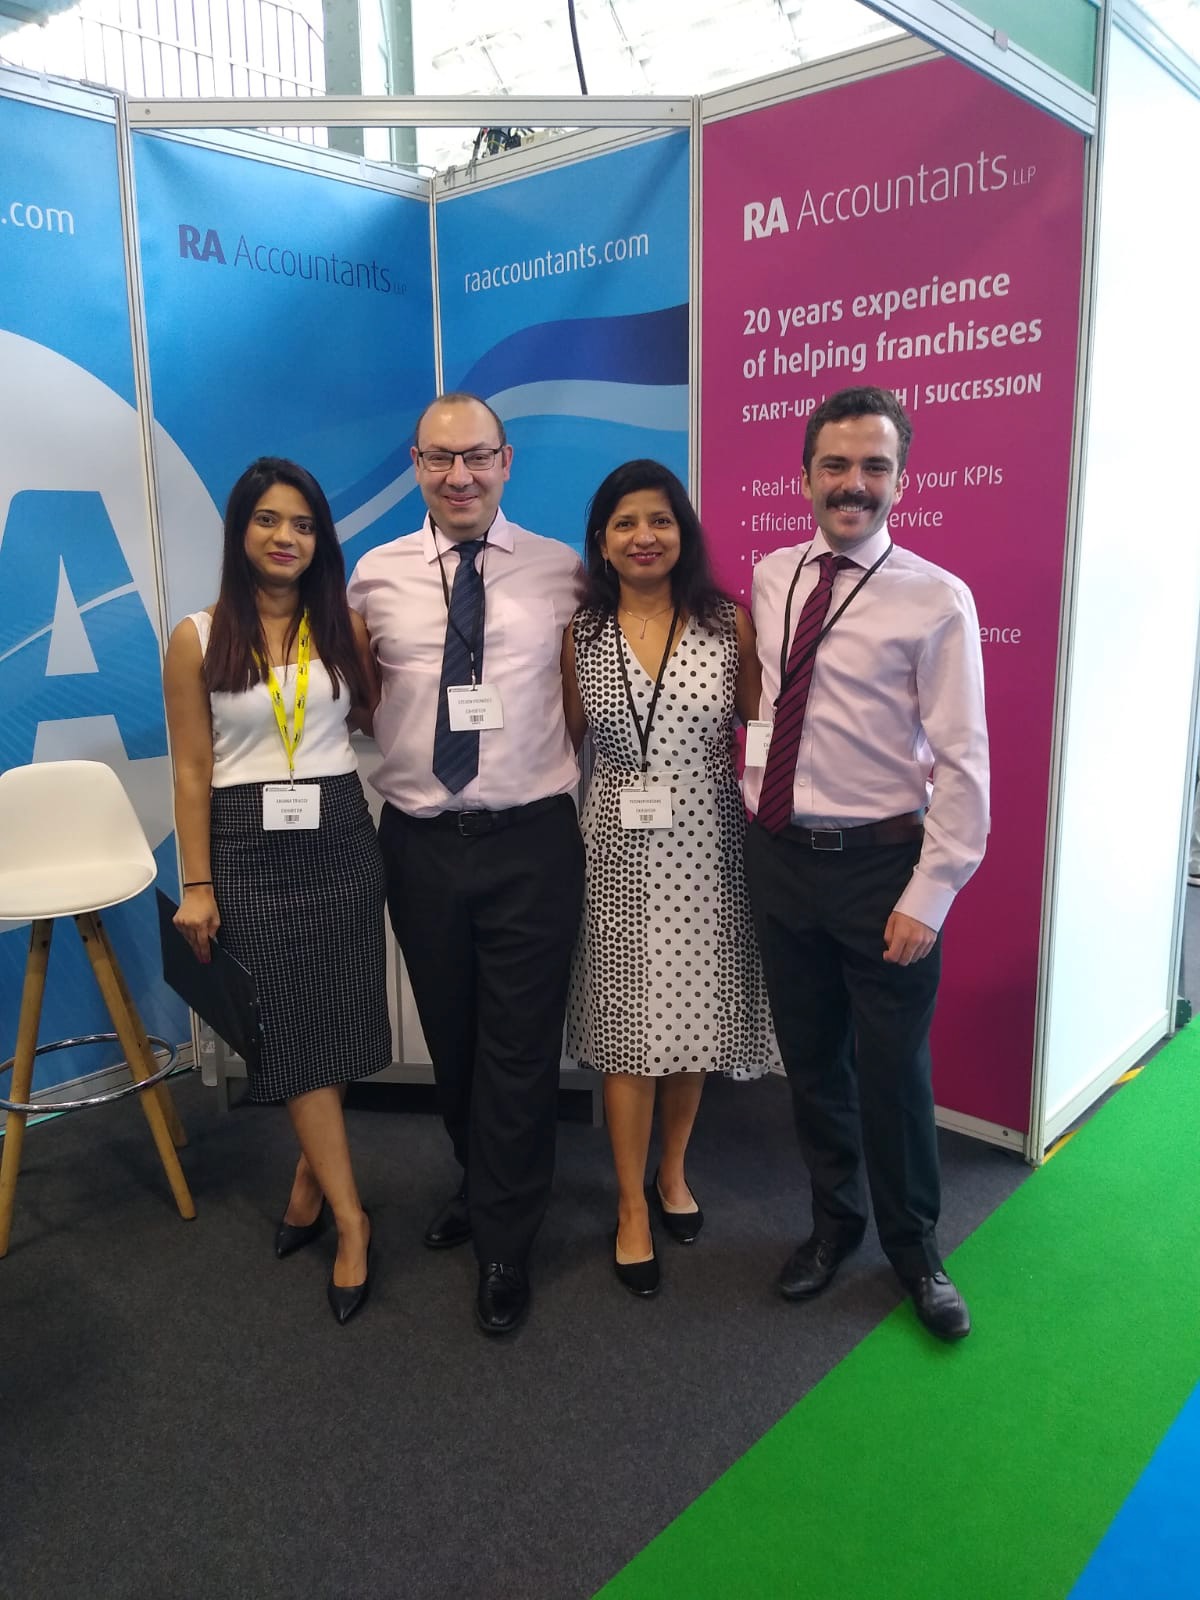 British and International Franchise Exhibition - come & see the RA Accountants' Team at this year's show.